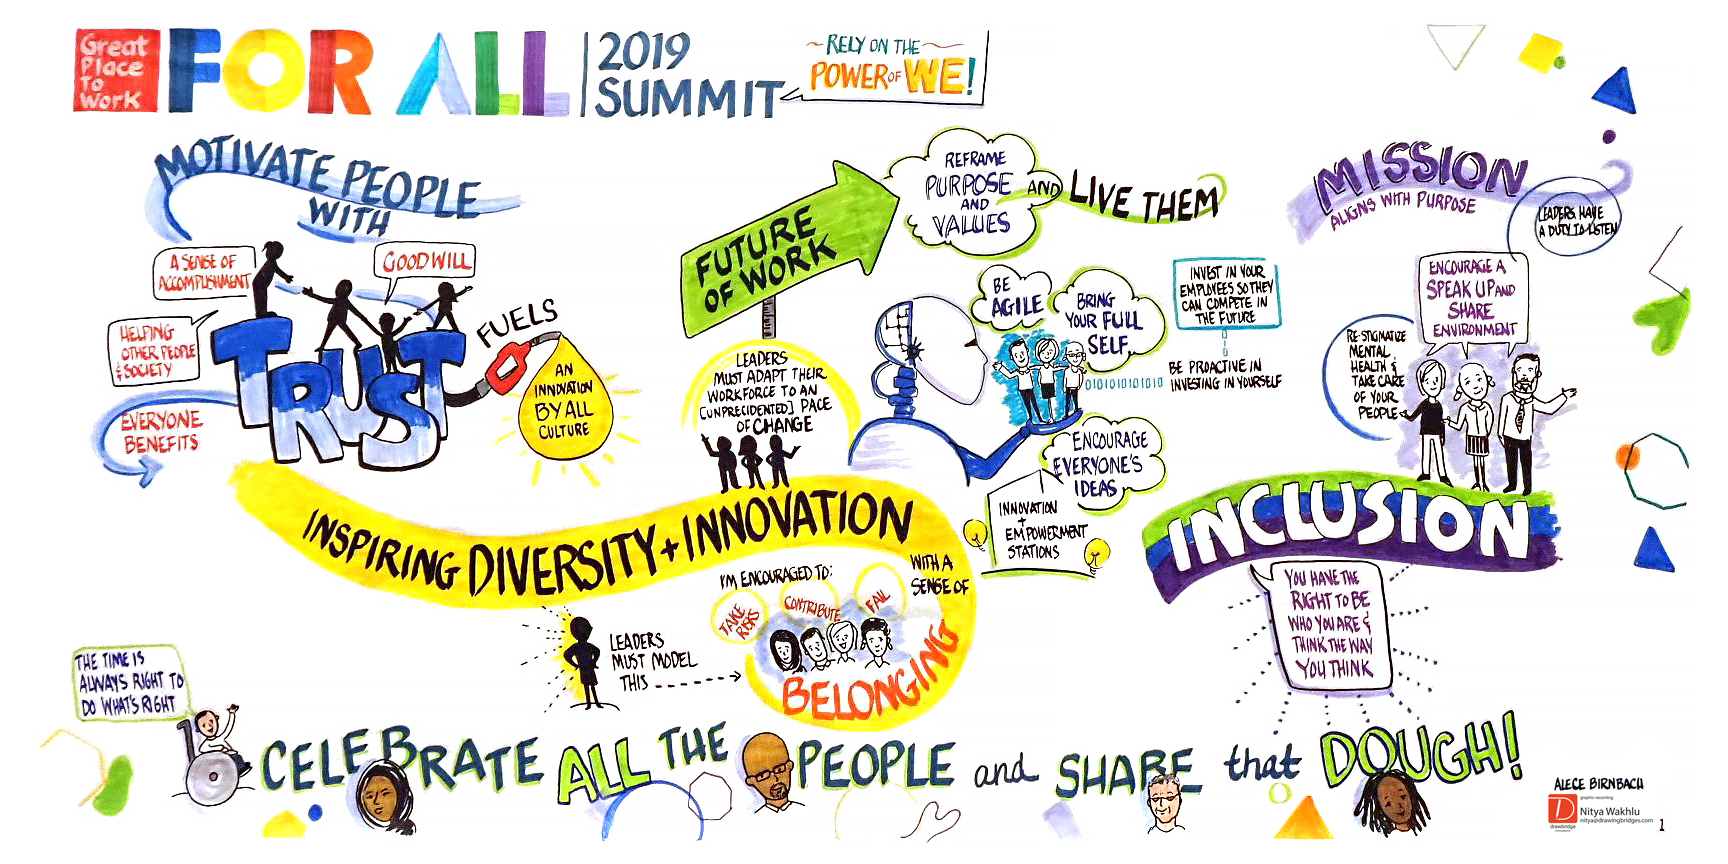  Beautiful Notes on Innovation, D&I from Summit